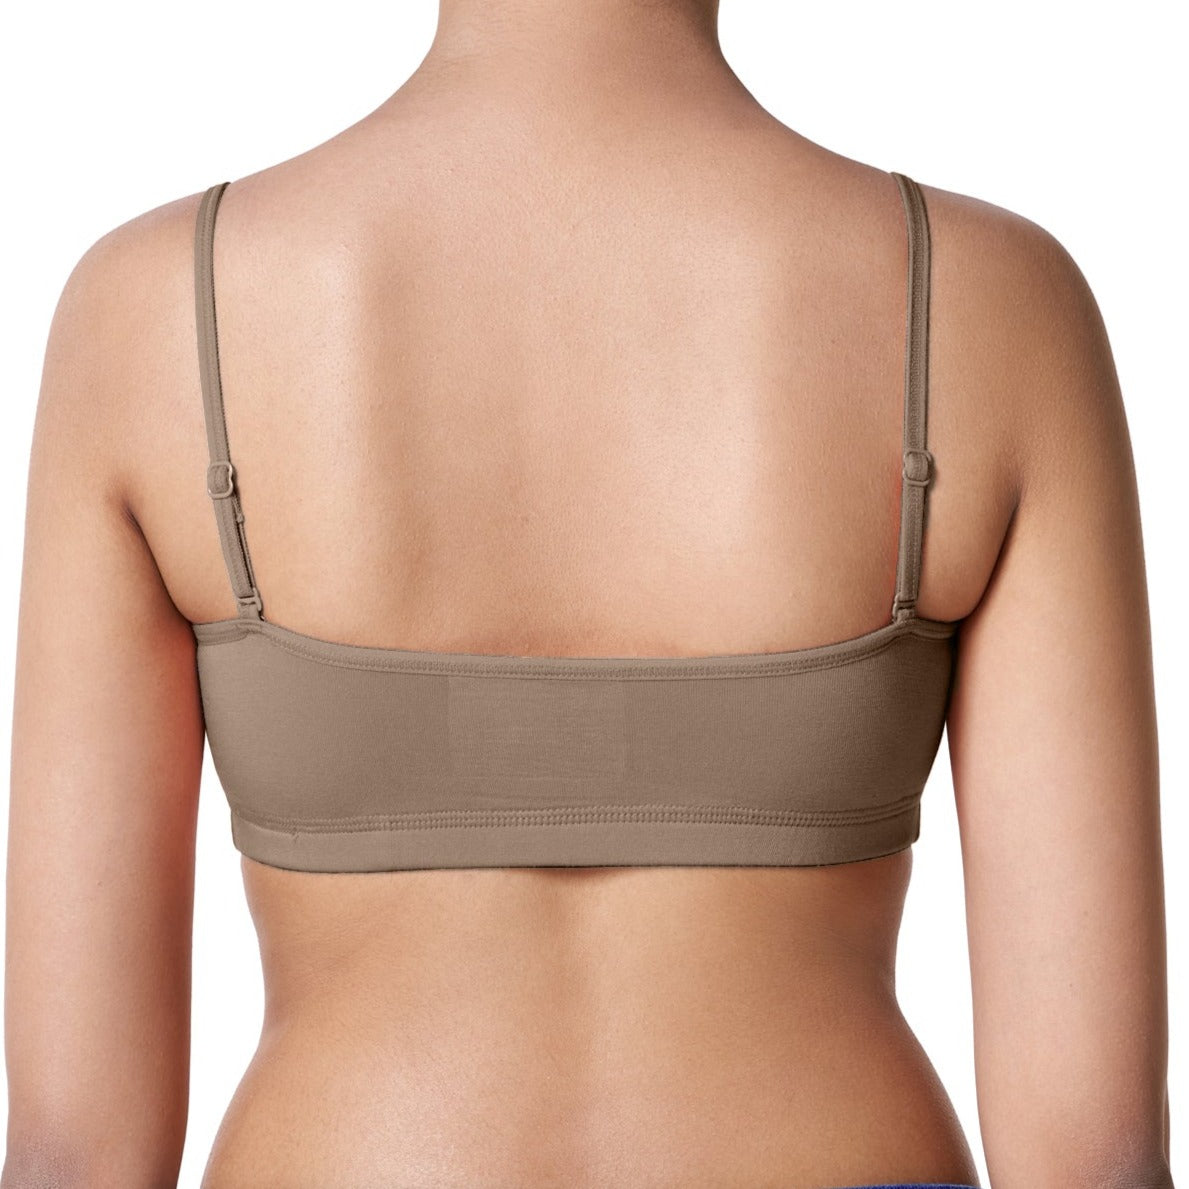 blossom-starters bra-camel brown4-teen collection